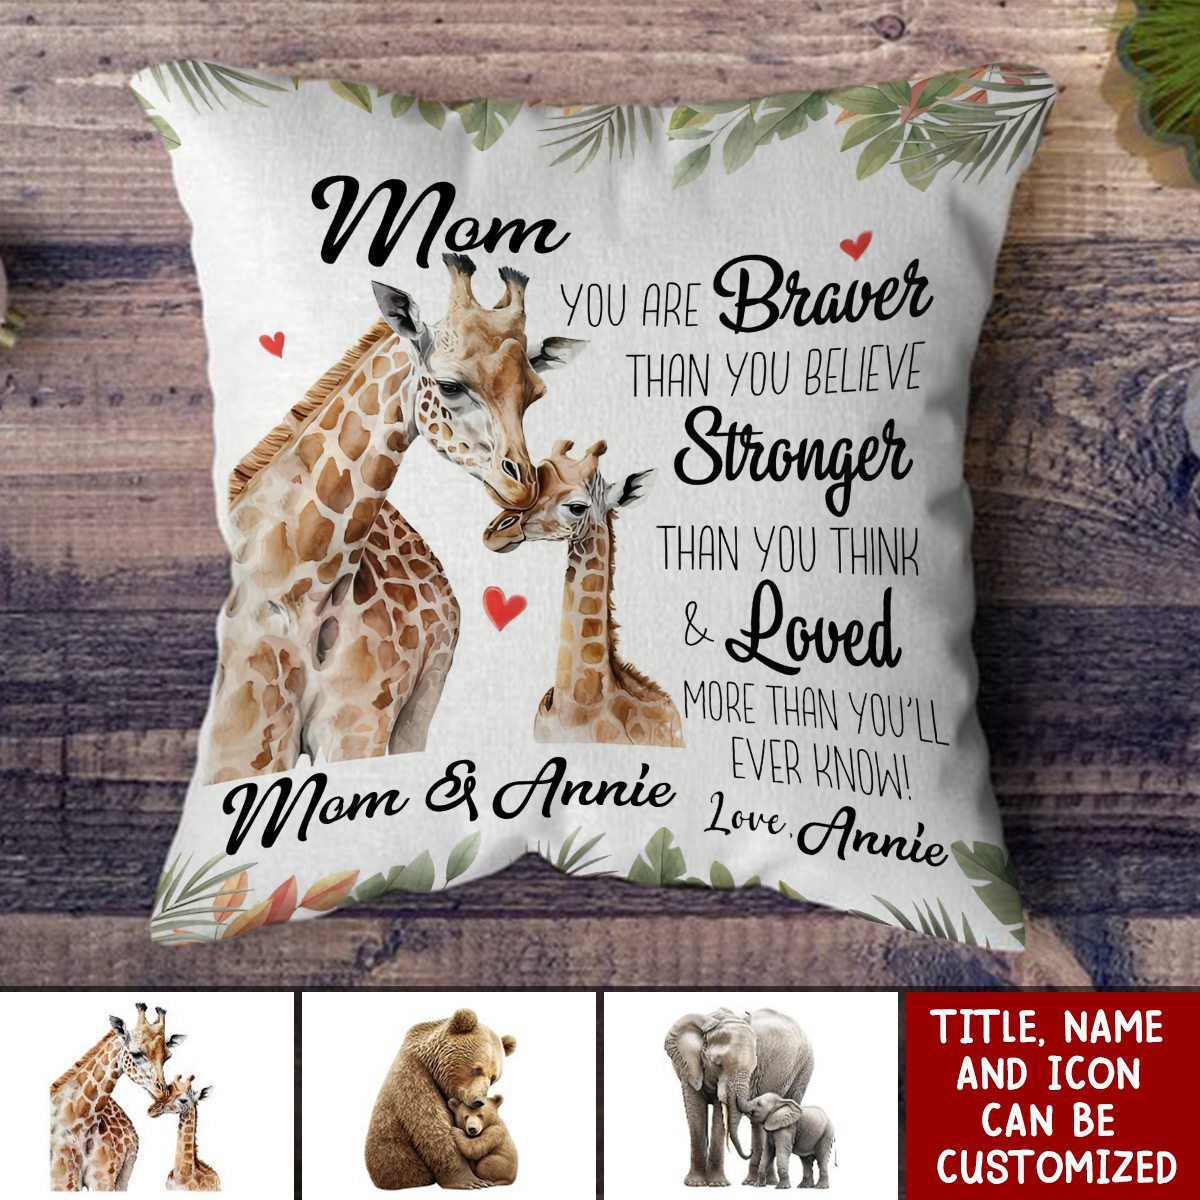 You're Loved More Than You Know - Personalized Pillow